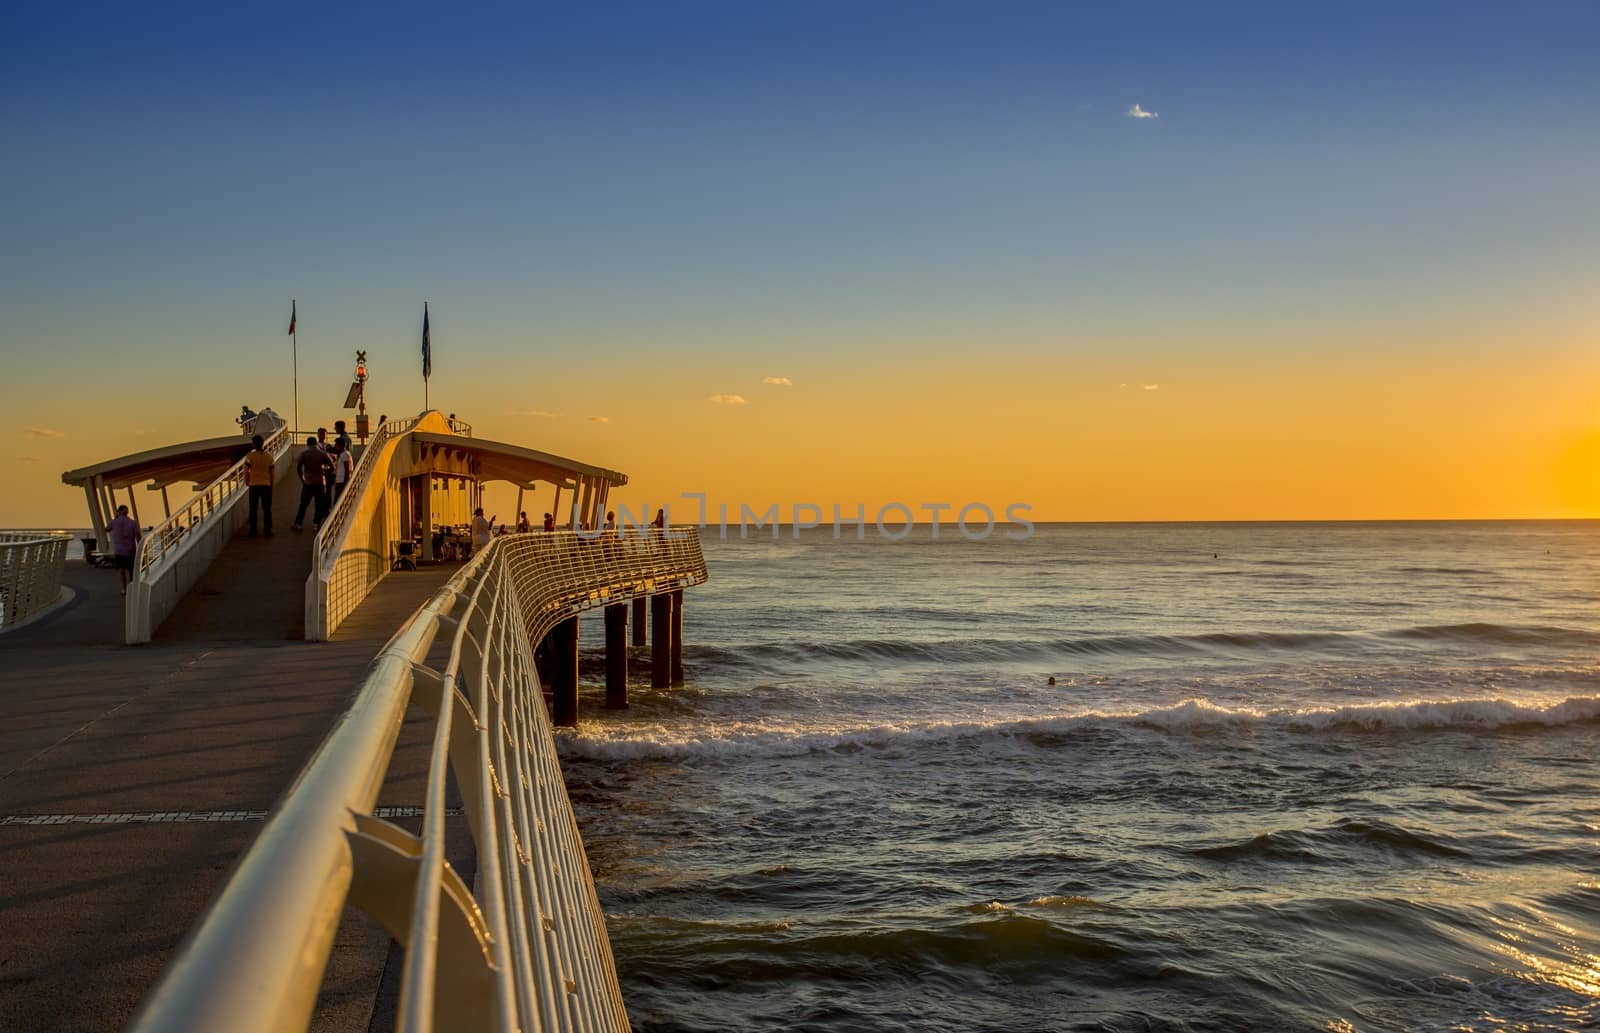 View of the jetty of Lido di Camaiore, Lucca, Italy.